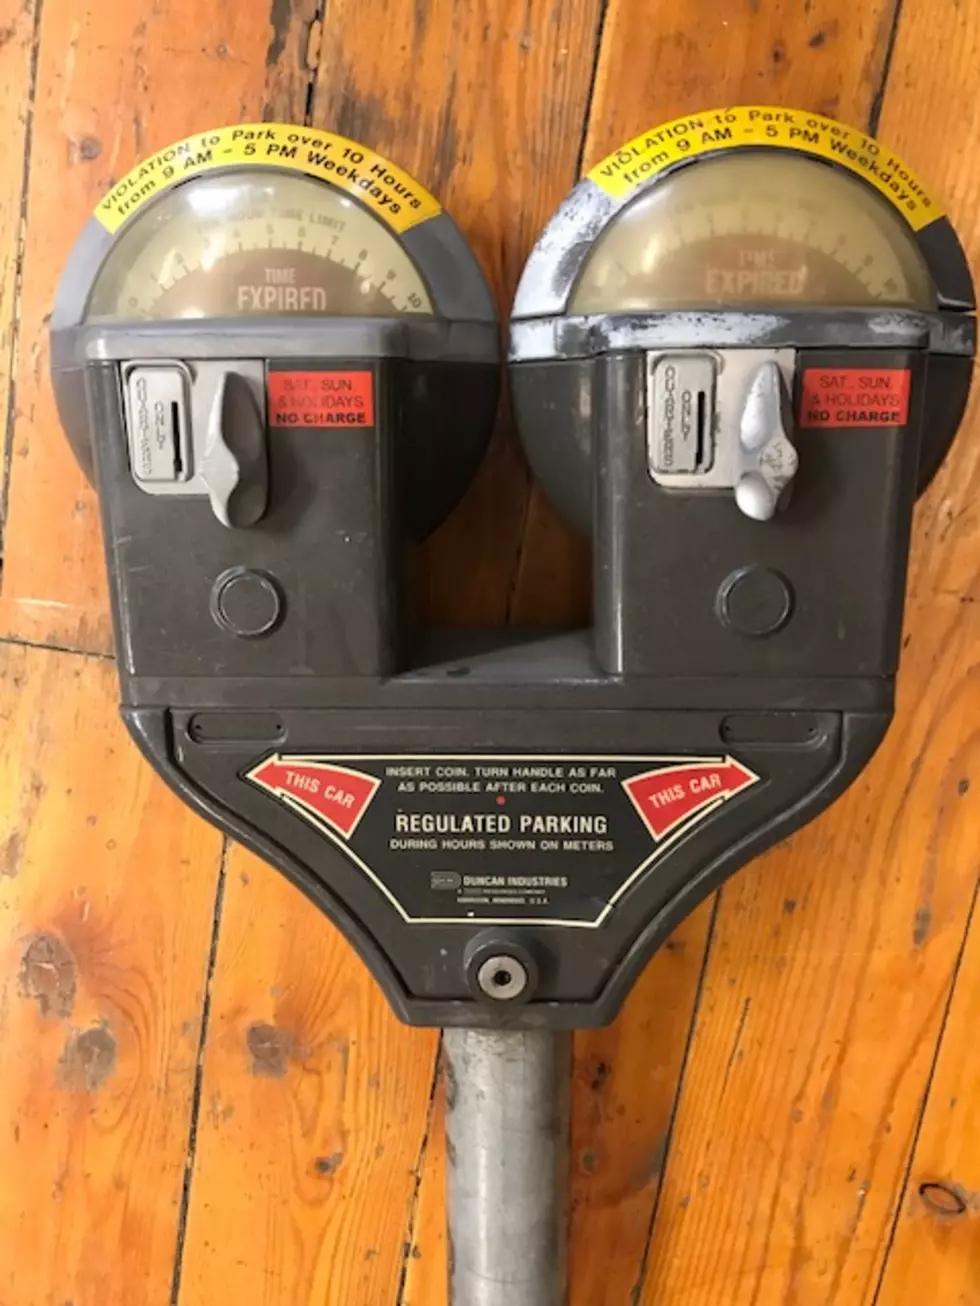 Own A Piece of Missoula – Final Parking Meters to Be Sold